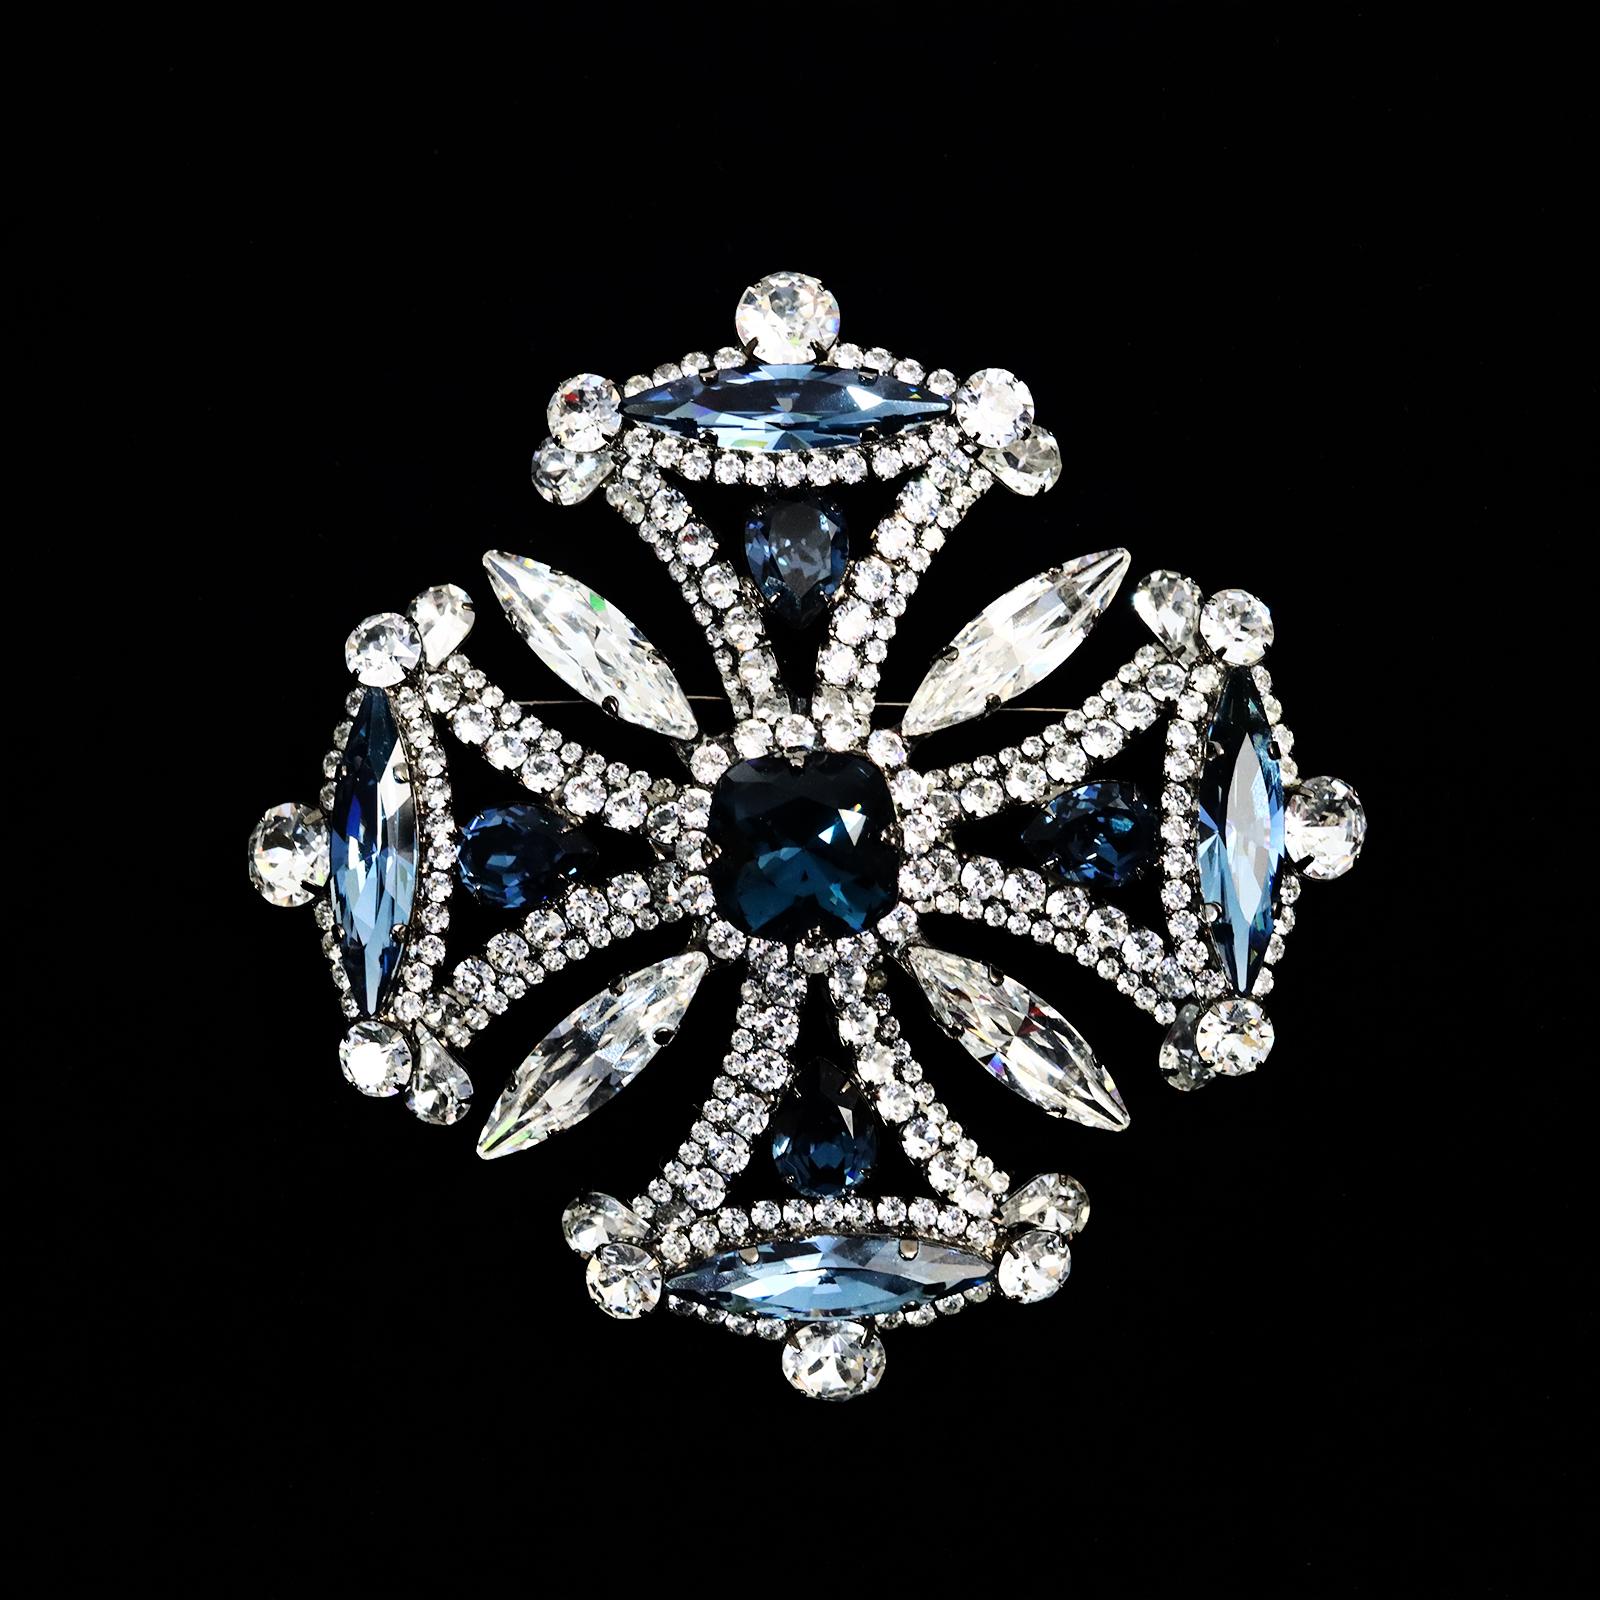 Women's or Men's Collectible Tim Szlyk Saphire Blue Clear Crystal Brooch and Pendant Circa 2000s For Sale